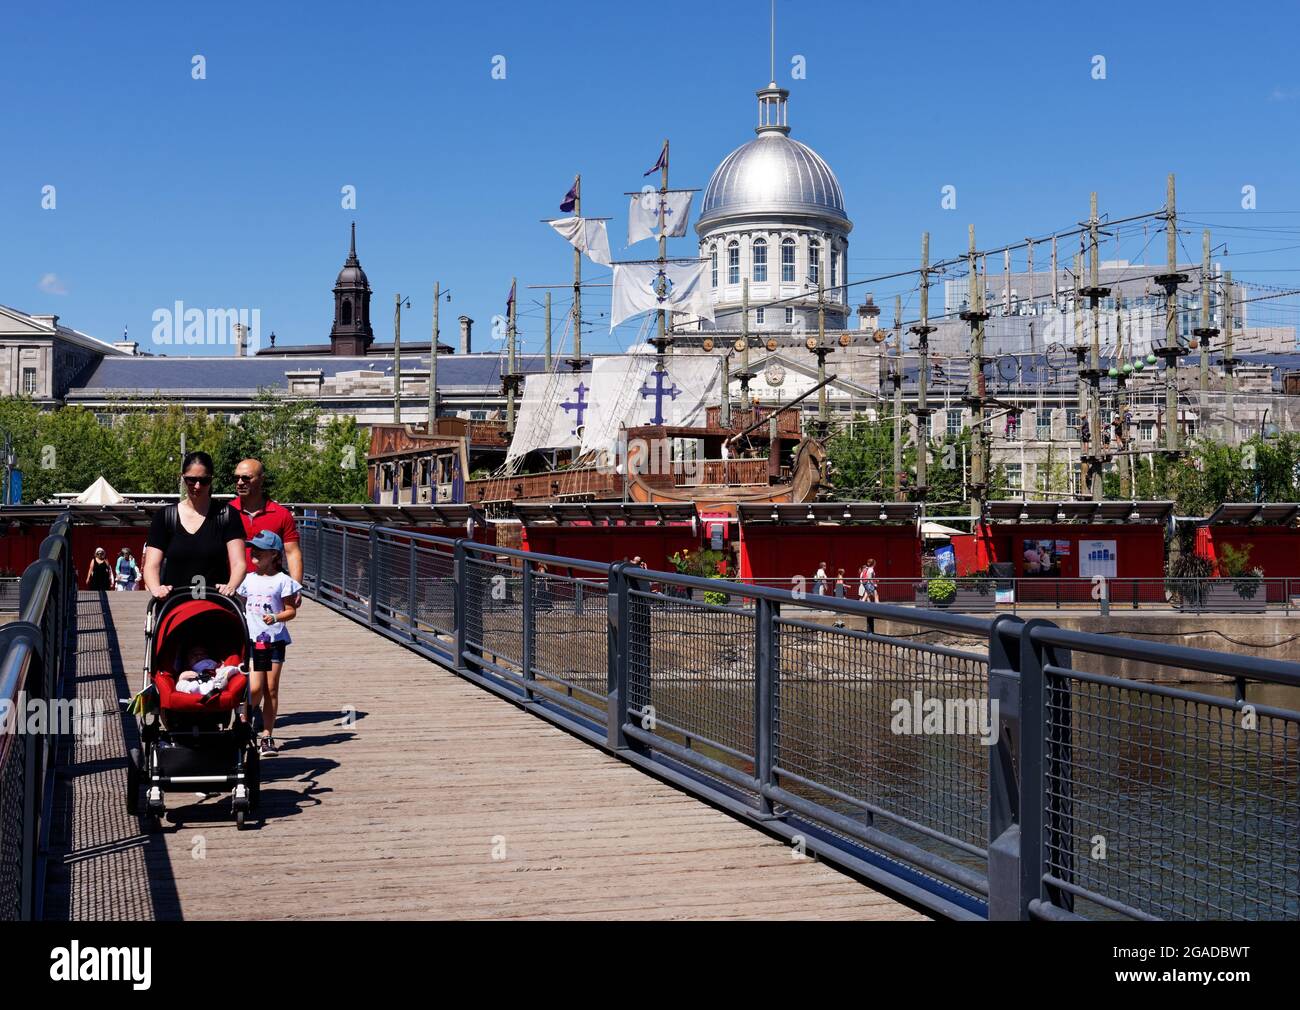 The Montreal Old Port (Le Vieux Port) with the dome of Marché Bonsecours and the Voiles en Voiles pirate ship adventure Stock Photo